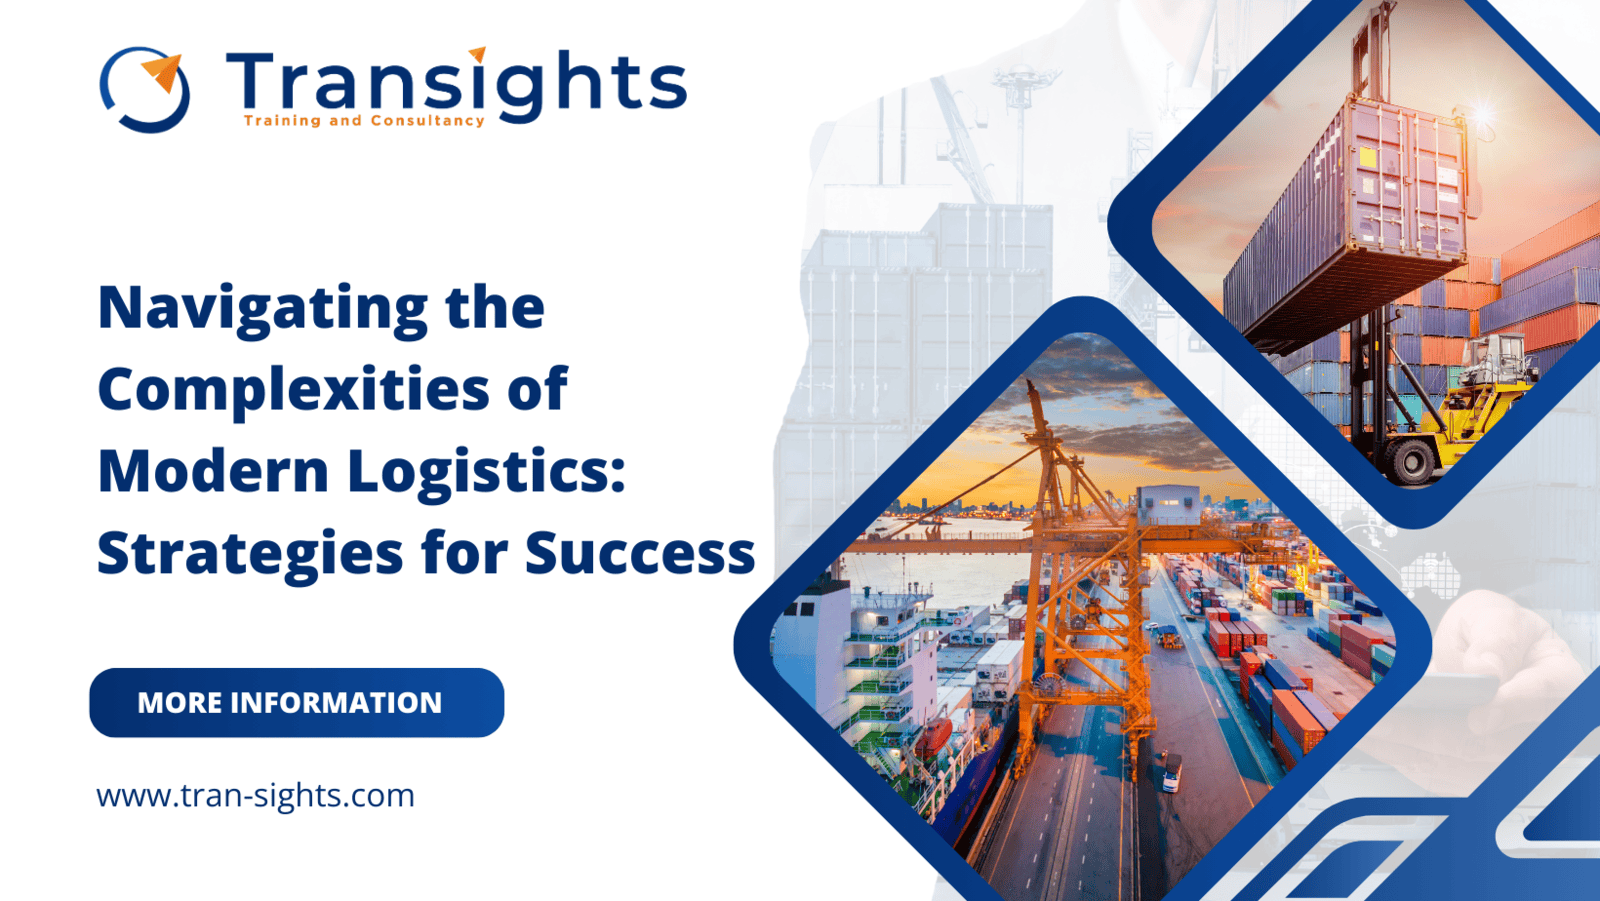 Navigating the Complexities of Modern Logistics: Strategies for Success